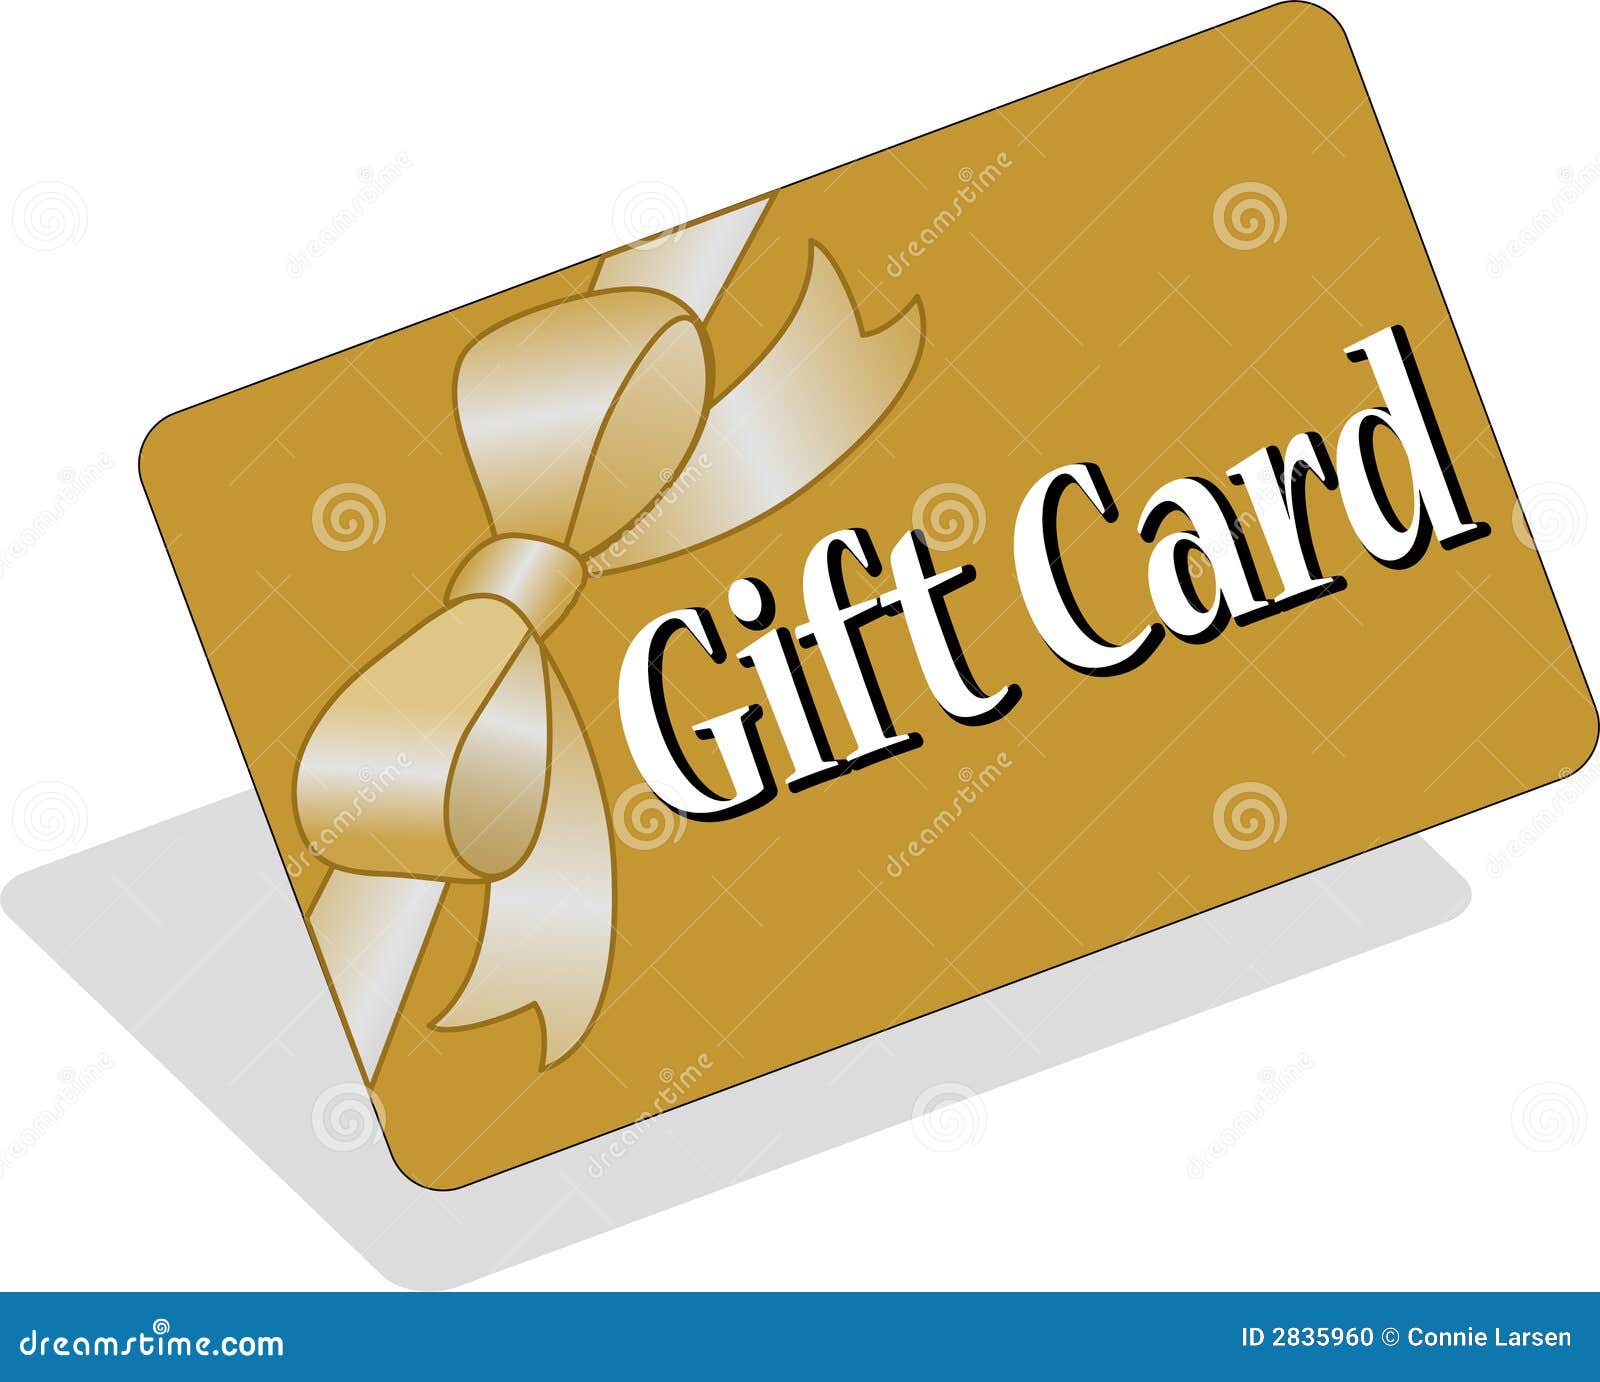 free gift card clipart - photo #3